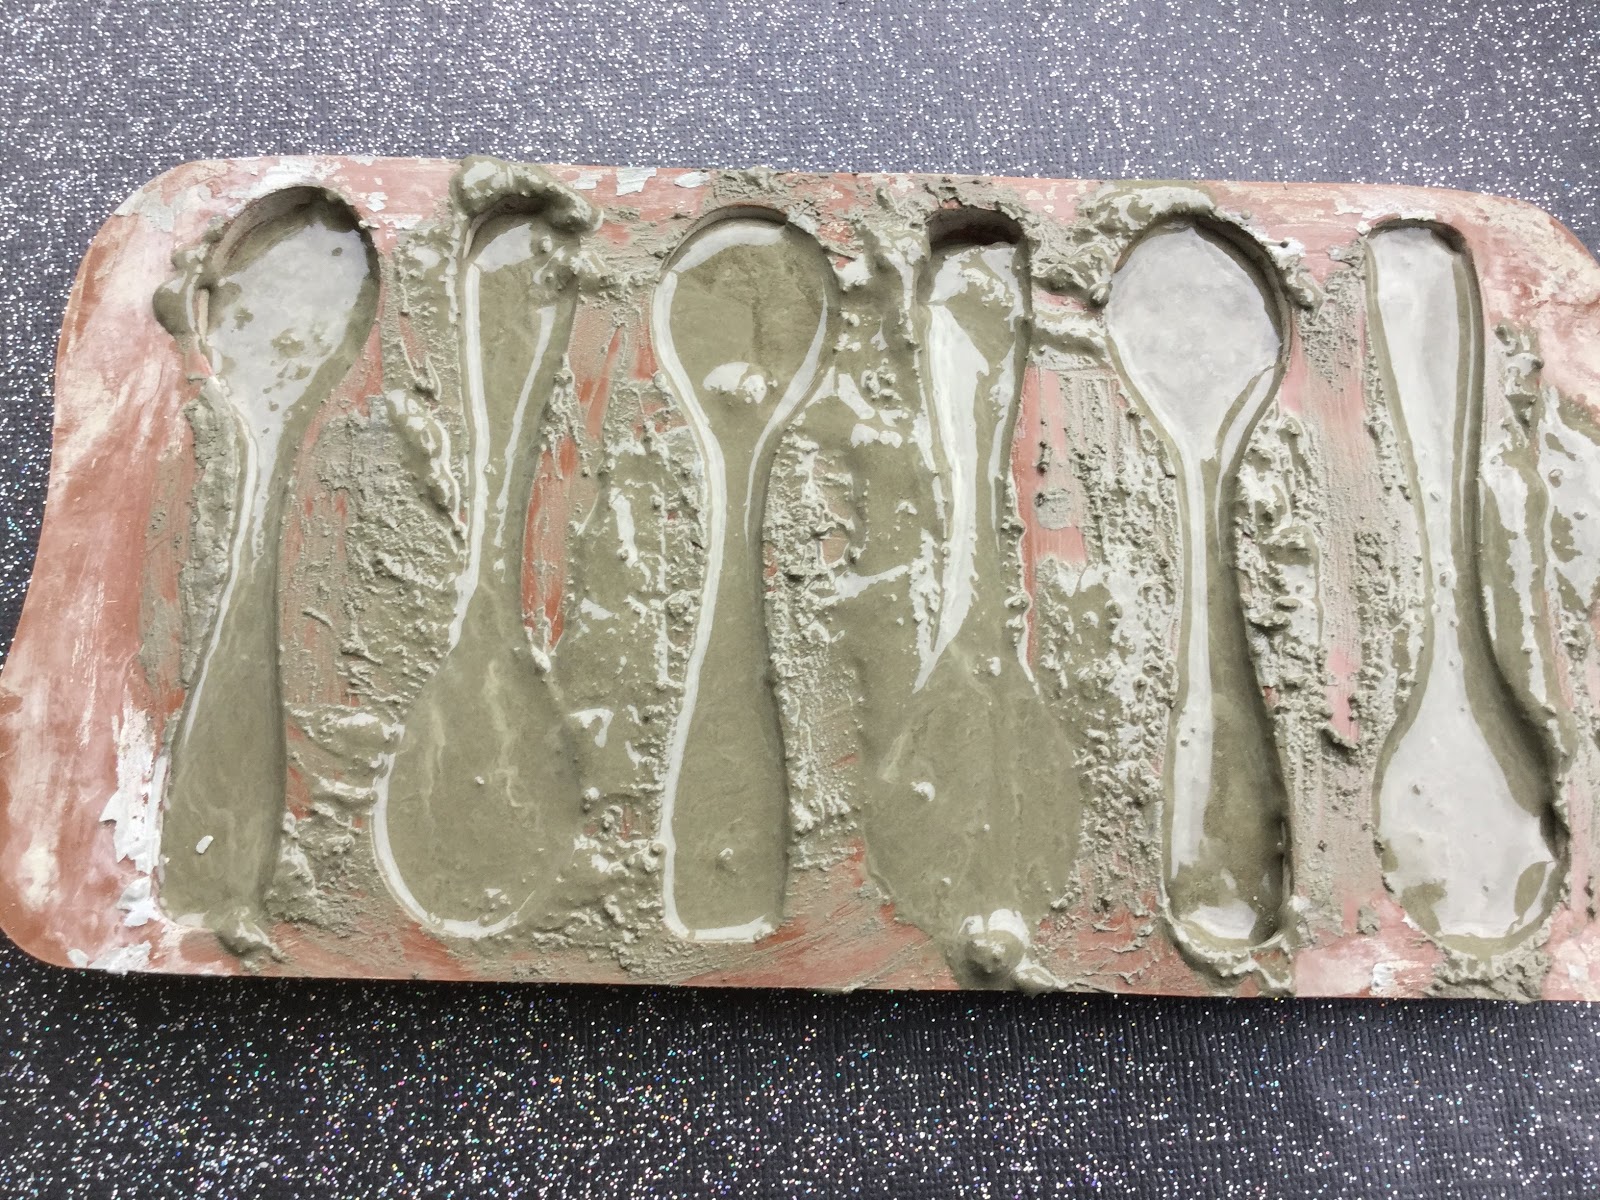 Crafting Reality with Sara: Cement Spoon Garden Markers